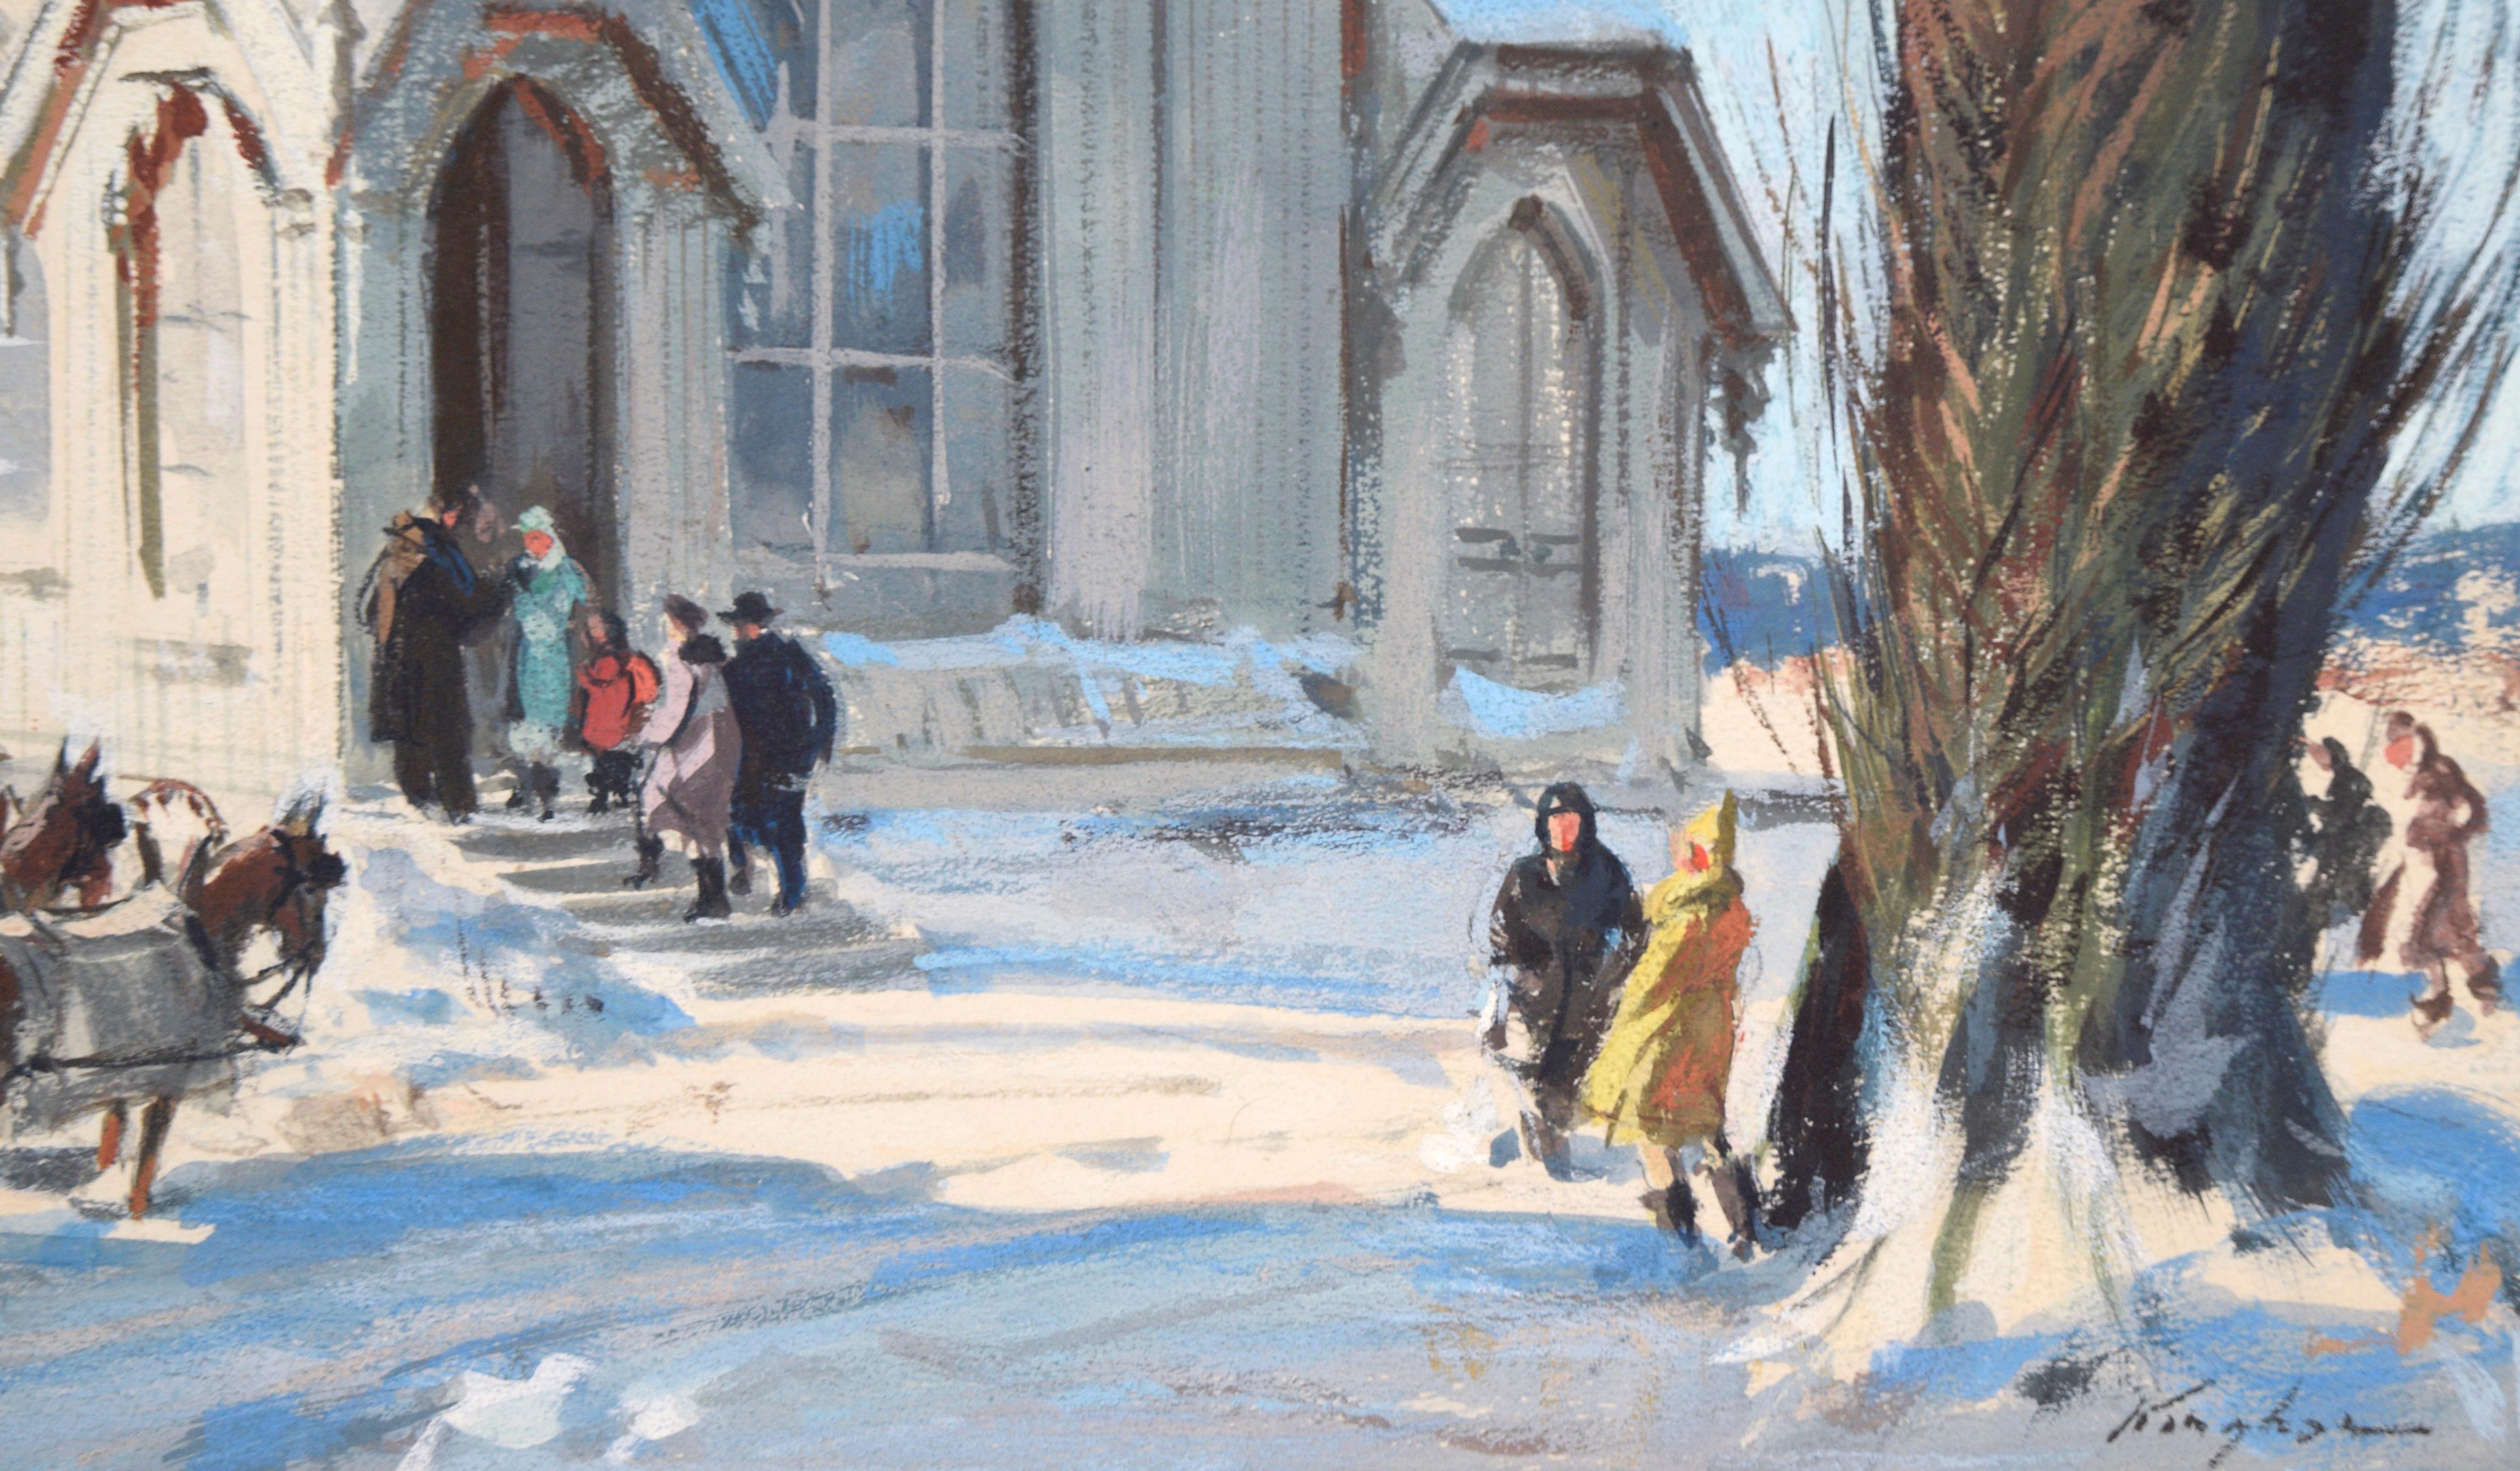 Arriving at Church in Winter - Figurative Realistic Illustration - Gray Figurative Painting by Charles Kinghan